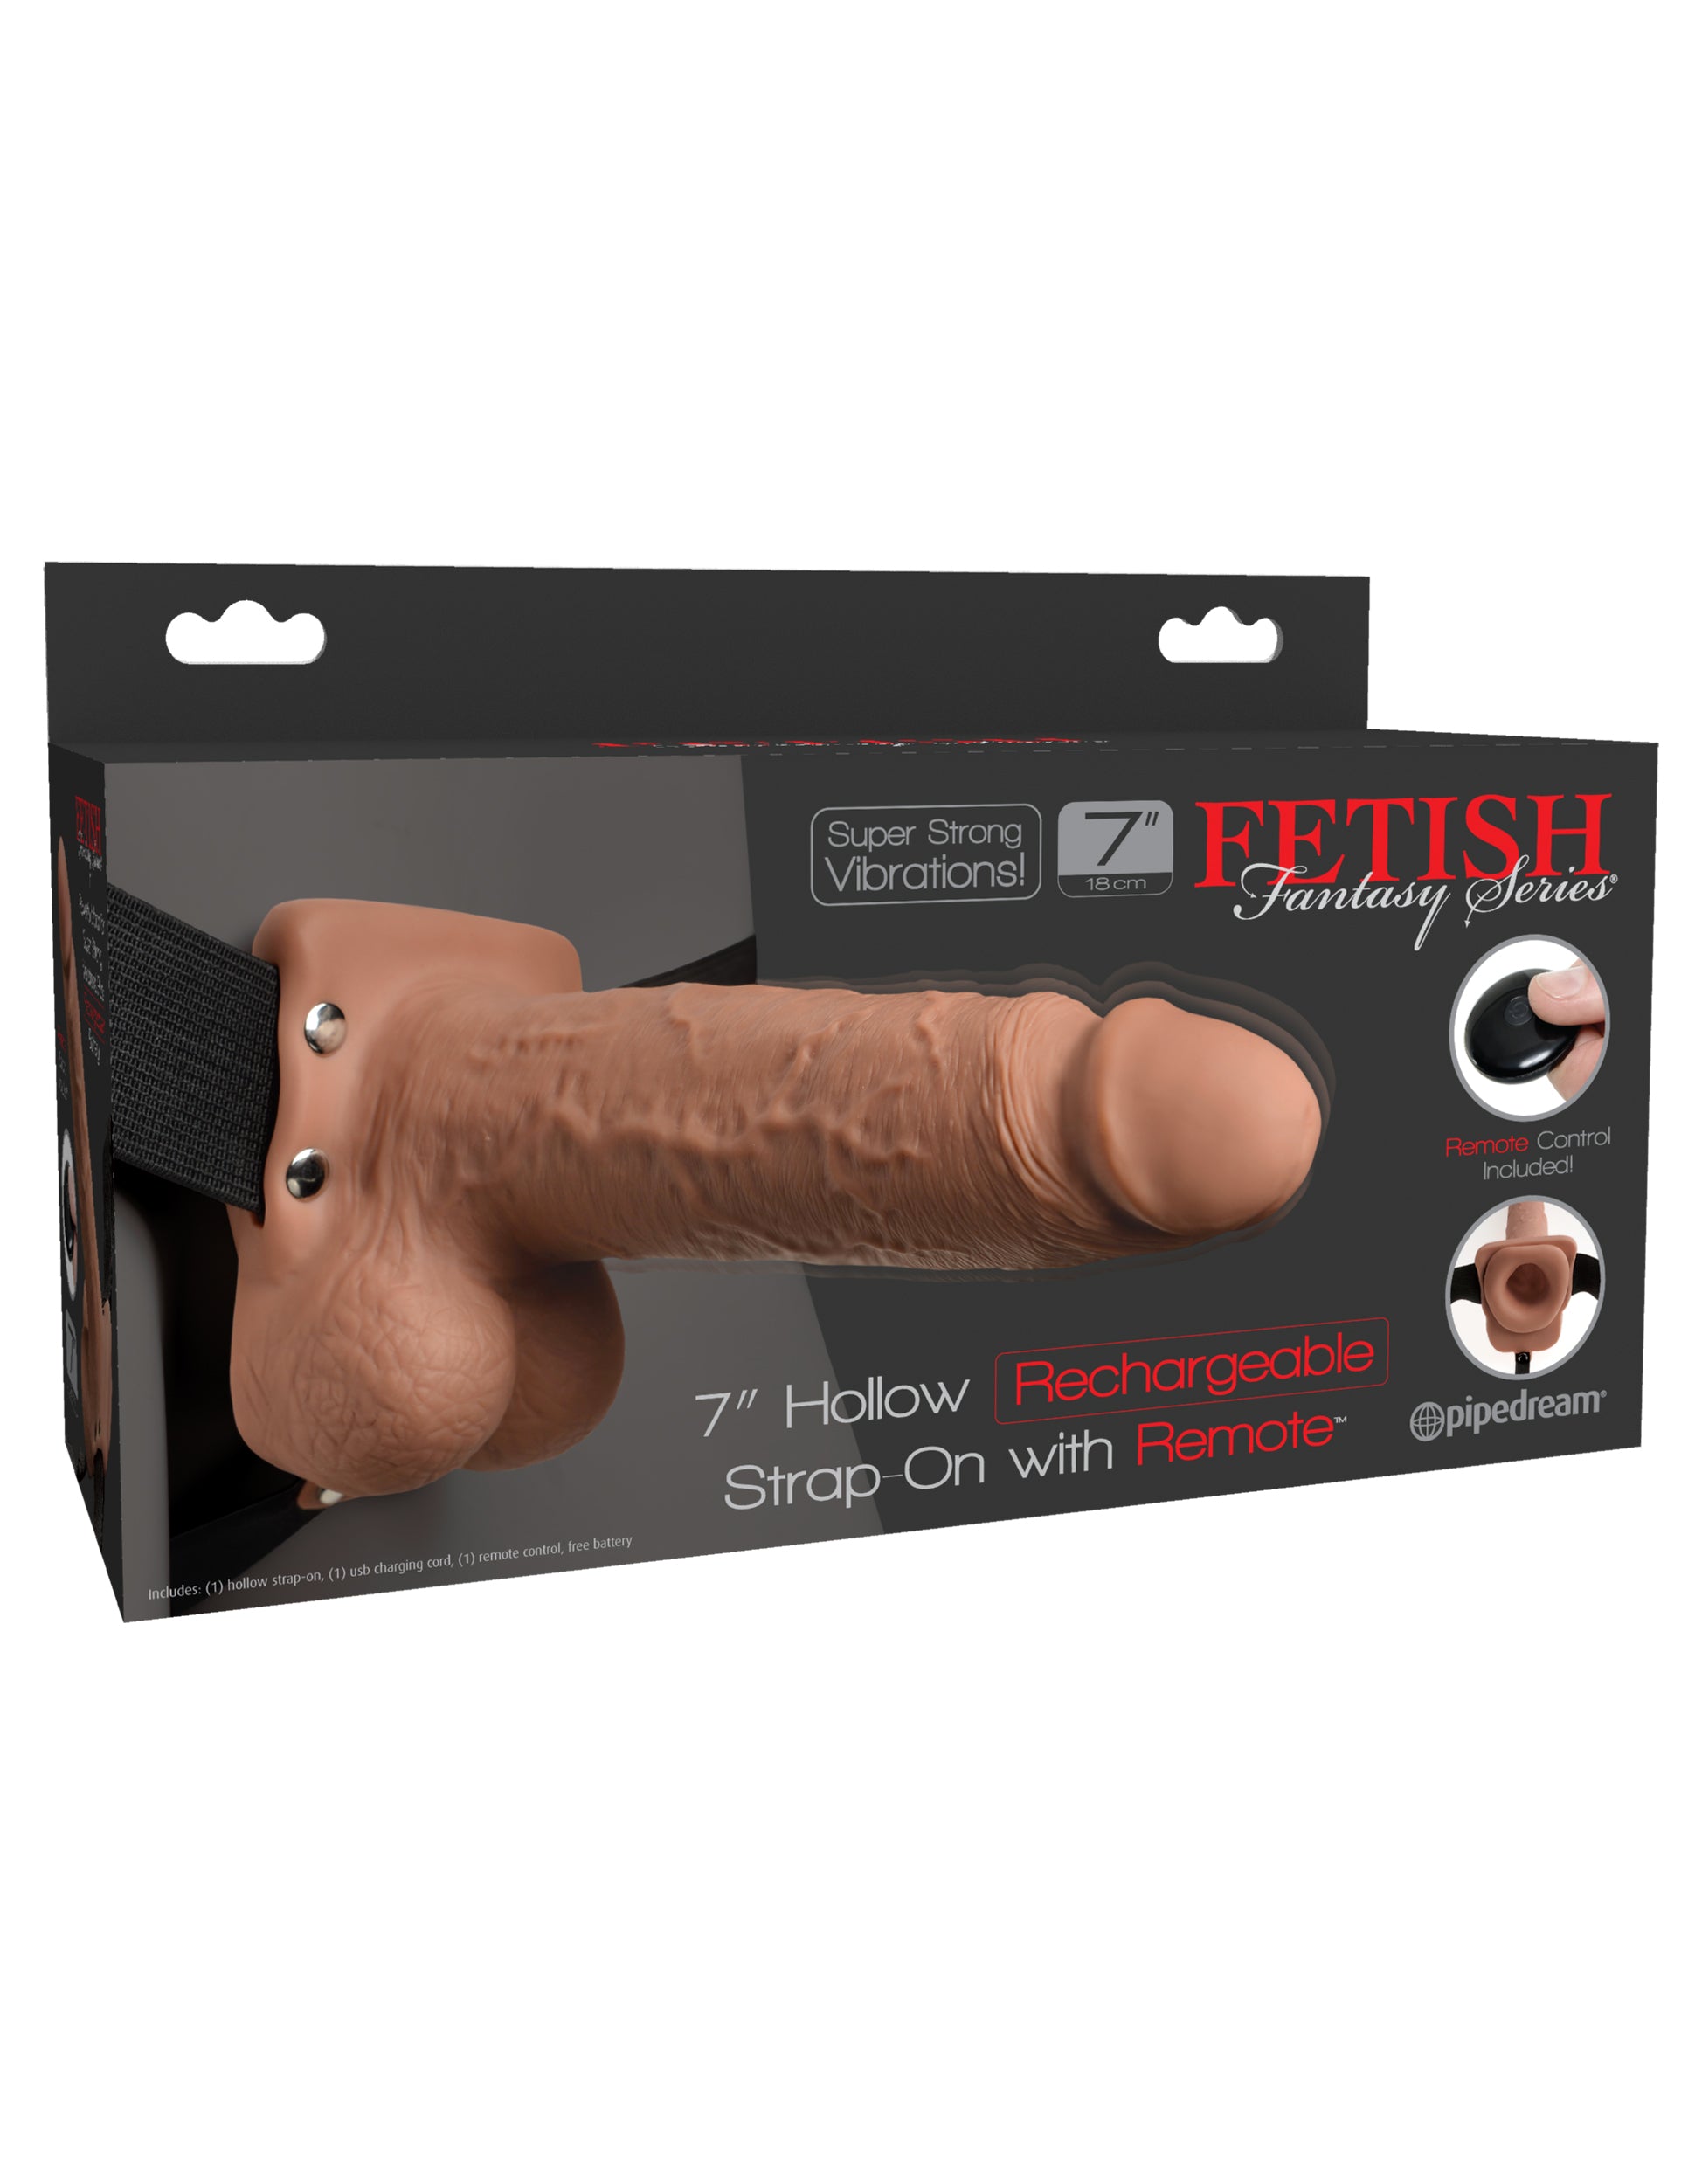 Fetish Fantasy Series 7" Hollow Rechargeable Strap-on With Remote - Tan PD3391-22